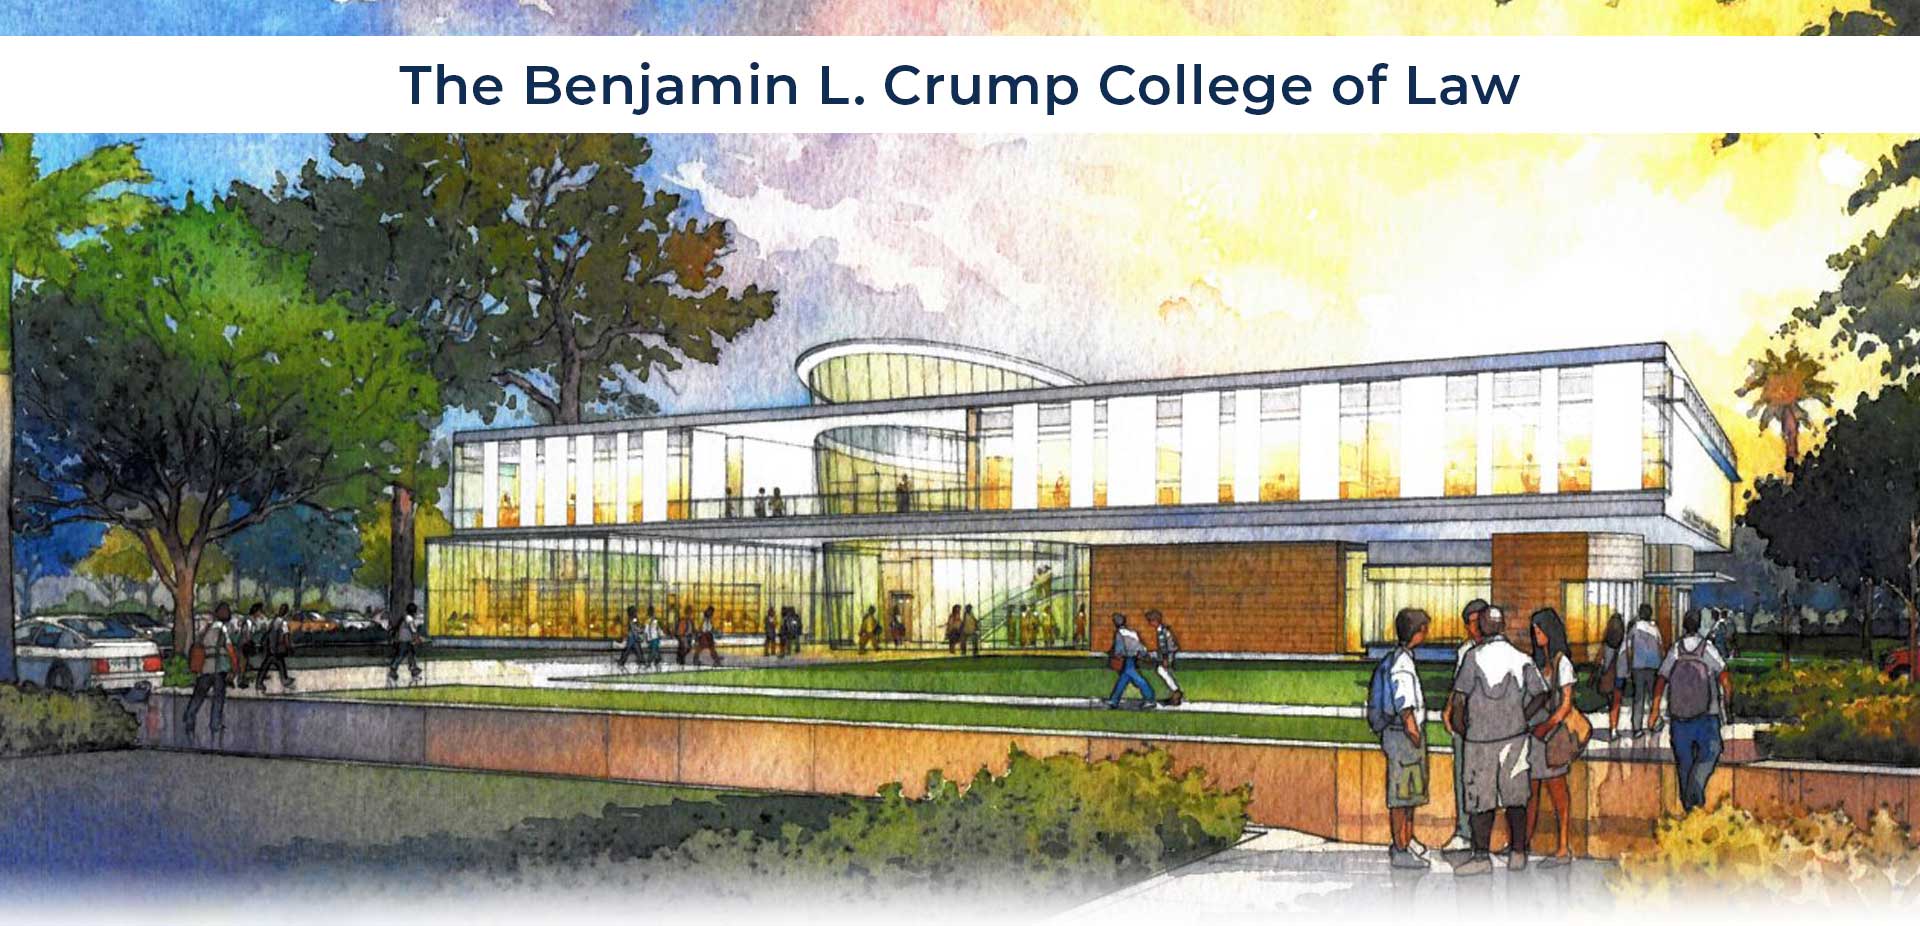 An artist's rendering of the upcoming Benjamin L. Crump College of Law building